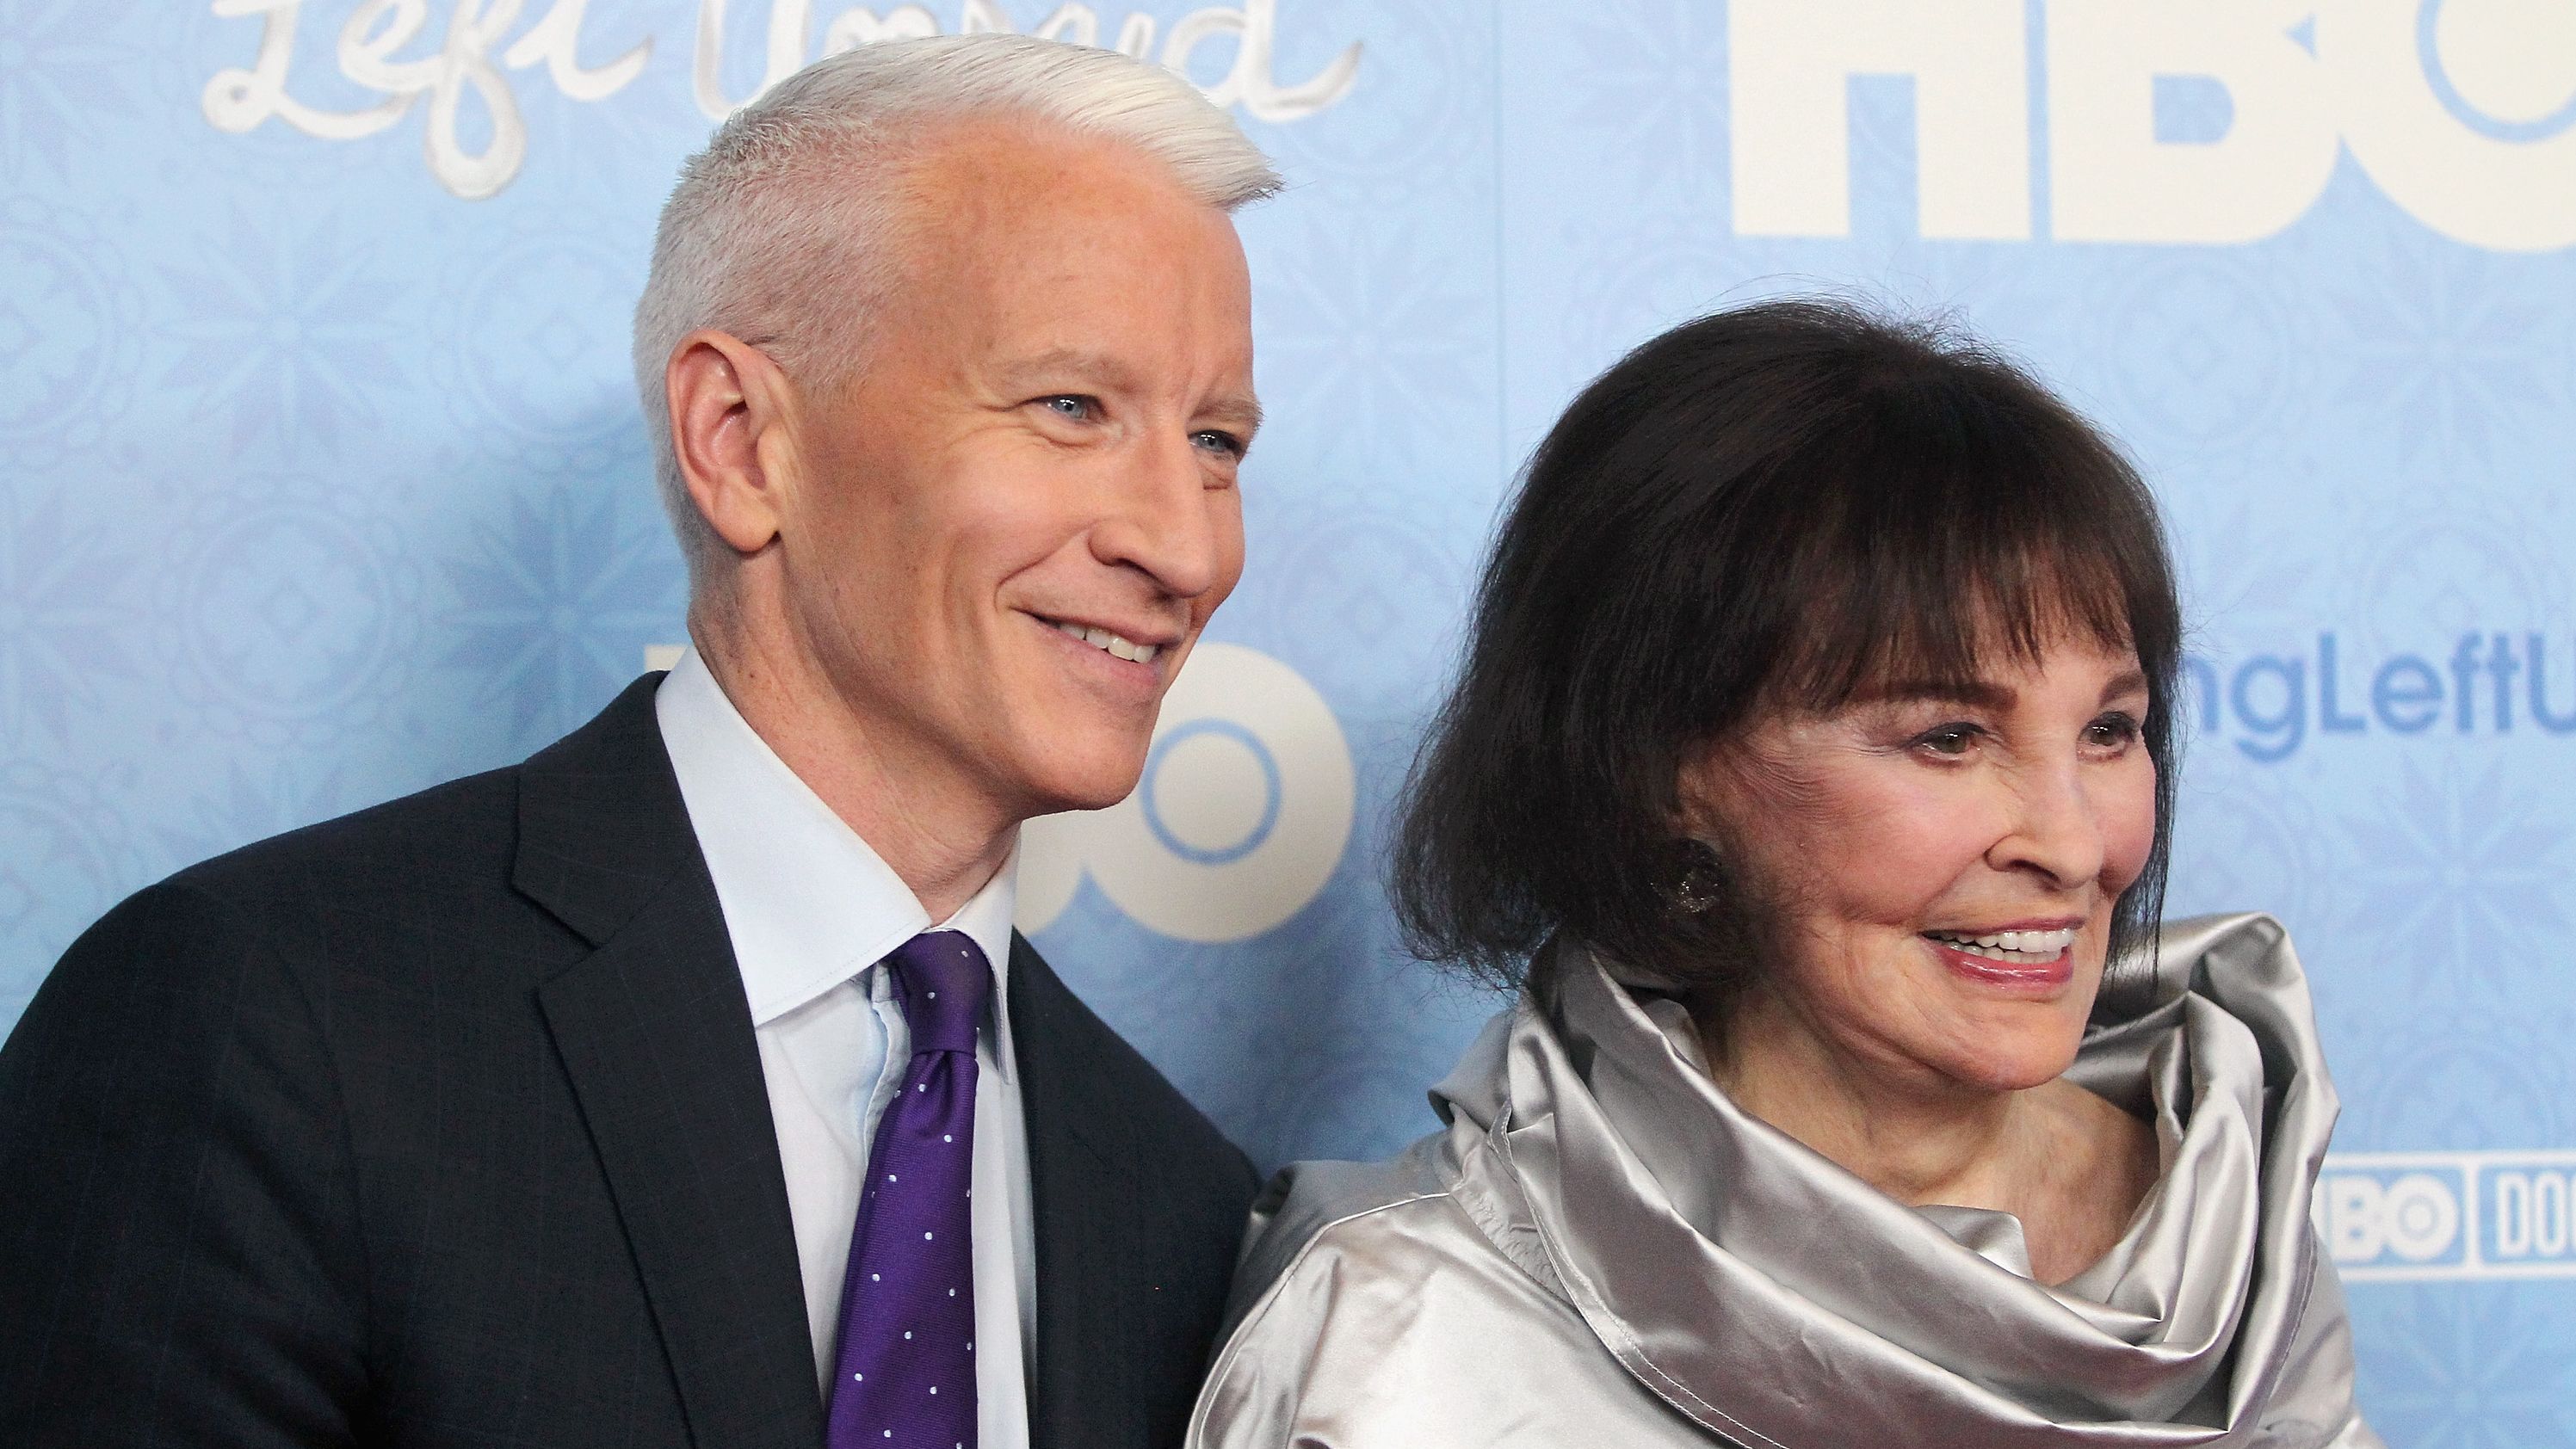 Vanderbilt and her son Anderson attend the New York premiere of their HBO documentary "Nothing Left Unsaid" in 2016. Later that year, the pair published a joint memoir, "The Rainbow Comes and Goes: A Mother and Son on Life, Love, and Loss."